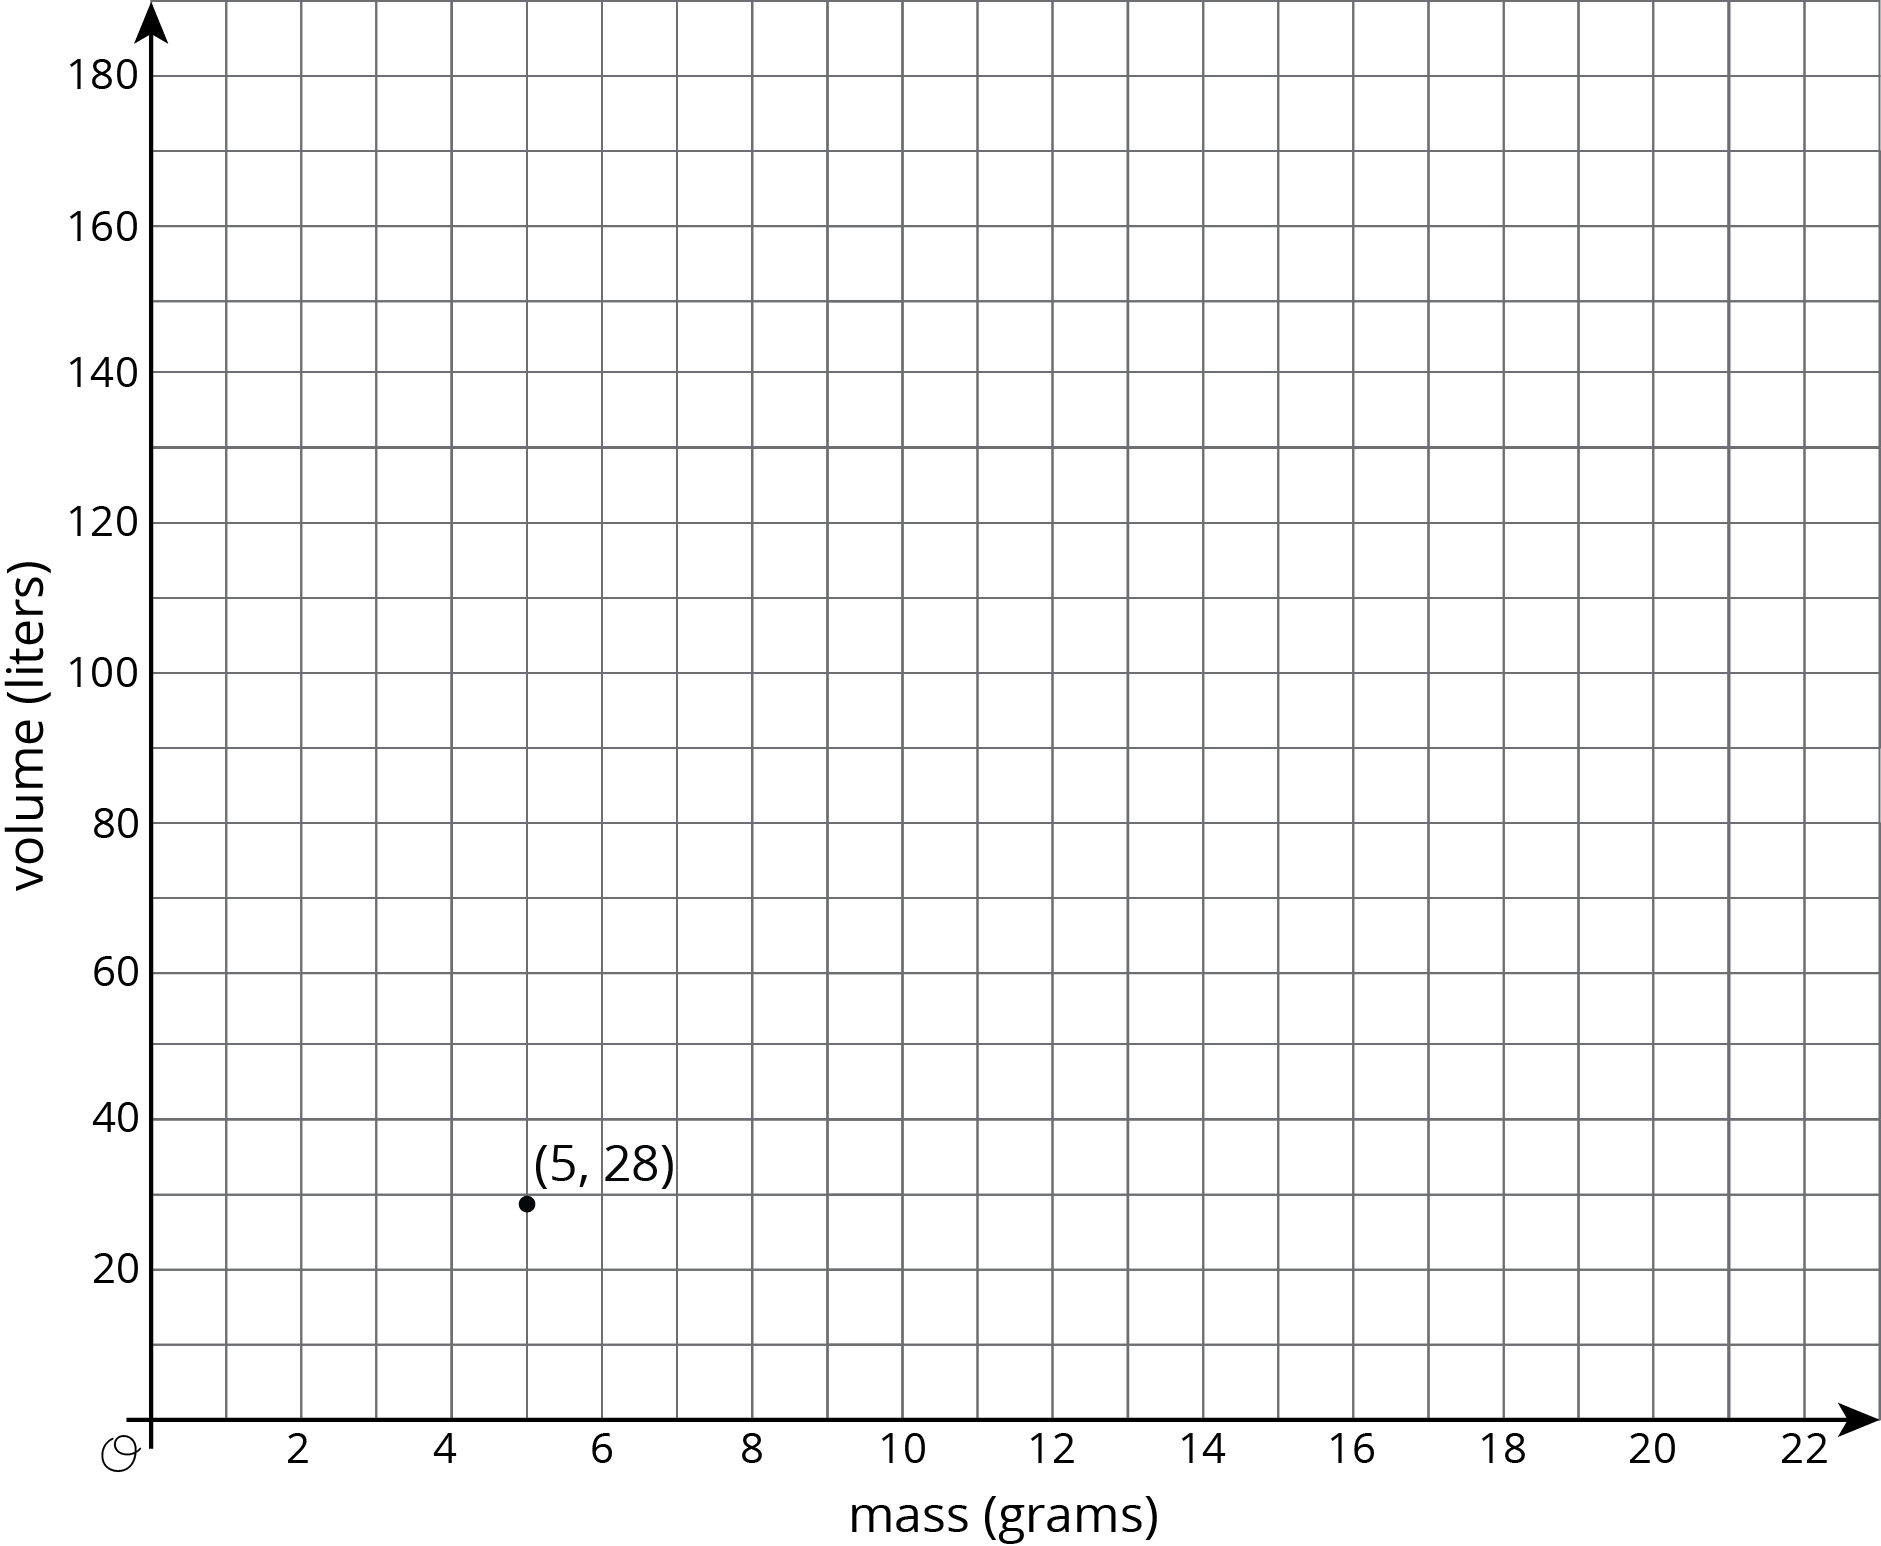 A coordinate plane with the origin labeled “O”. The horizontal axis is labeled “mass in grams” and the numbers 0 through 22, in increments of 2, are indicated. The vertical axis is labeled “volume in liters” and the numbers 0 through 180, in increments of 10, are indicated. The point with coordinates 5 comma 28 is indicated.